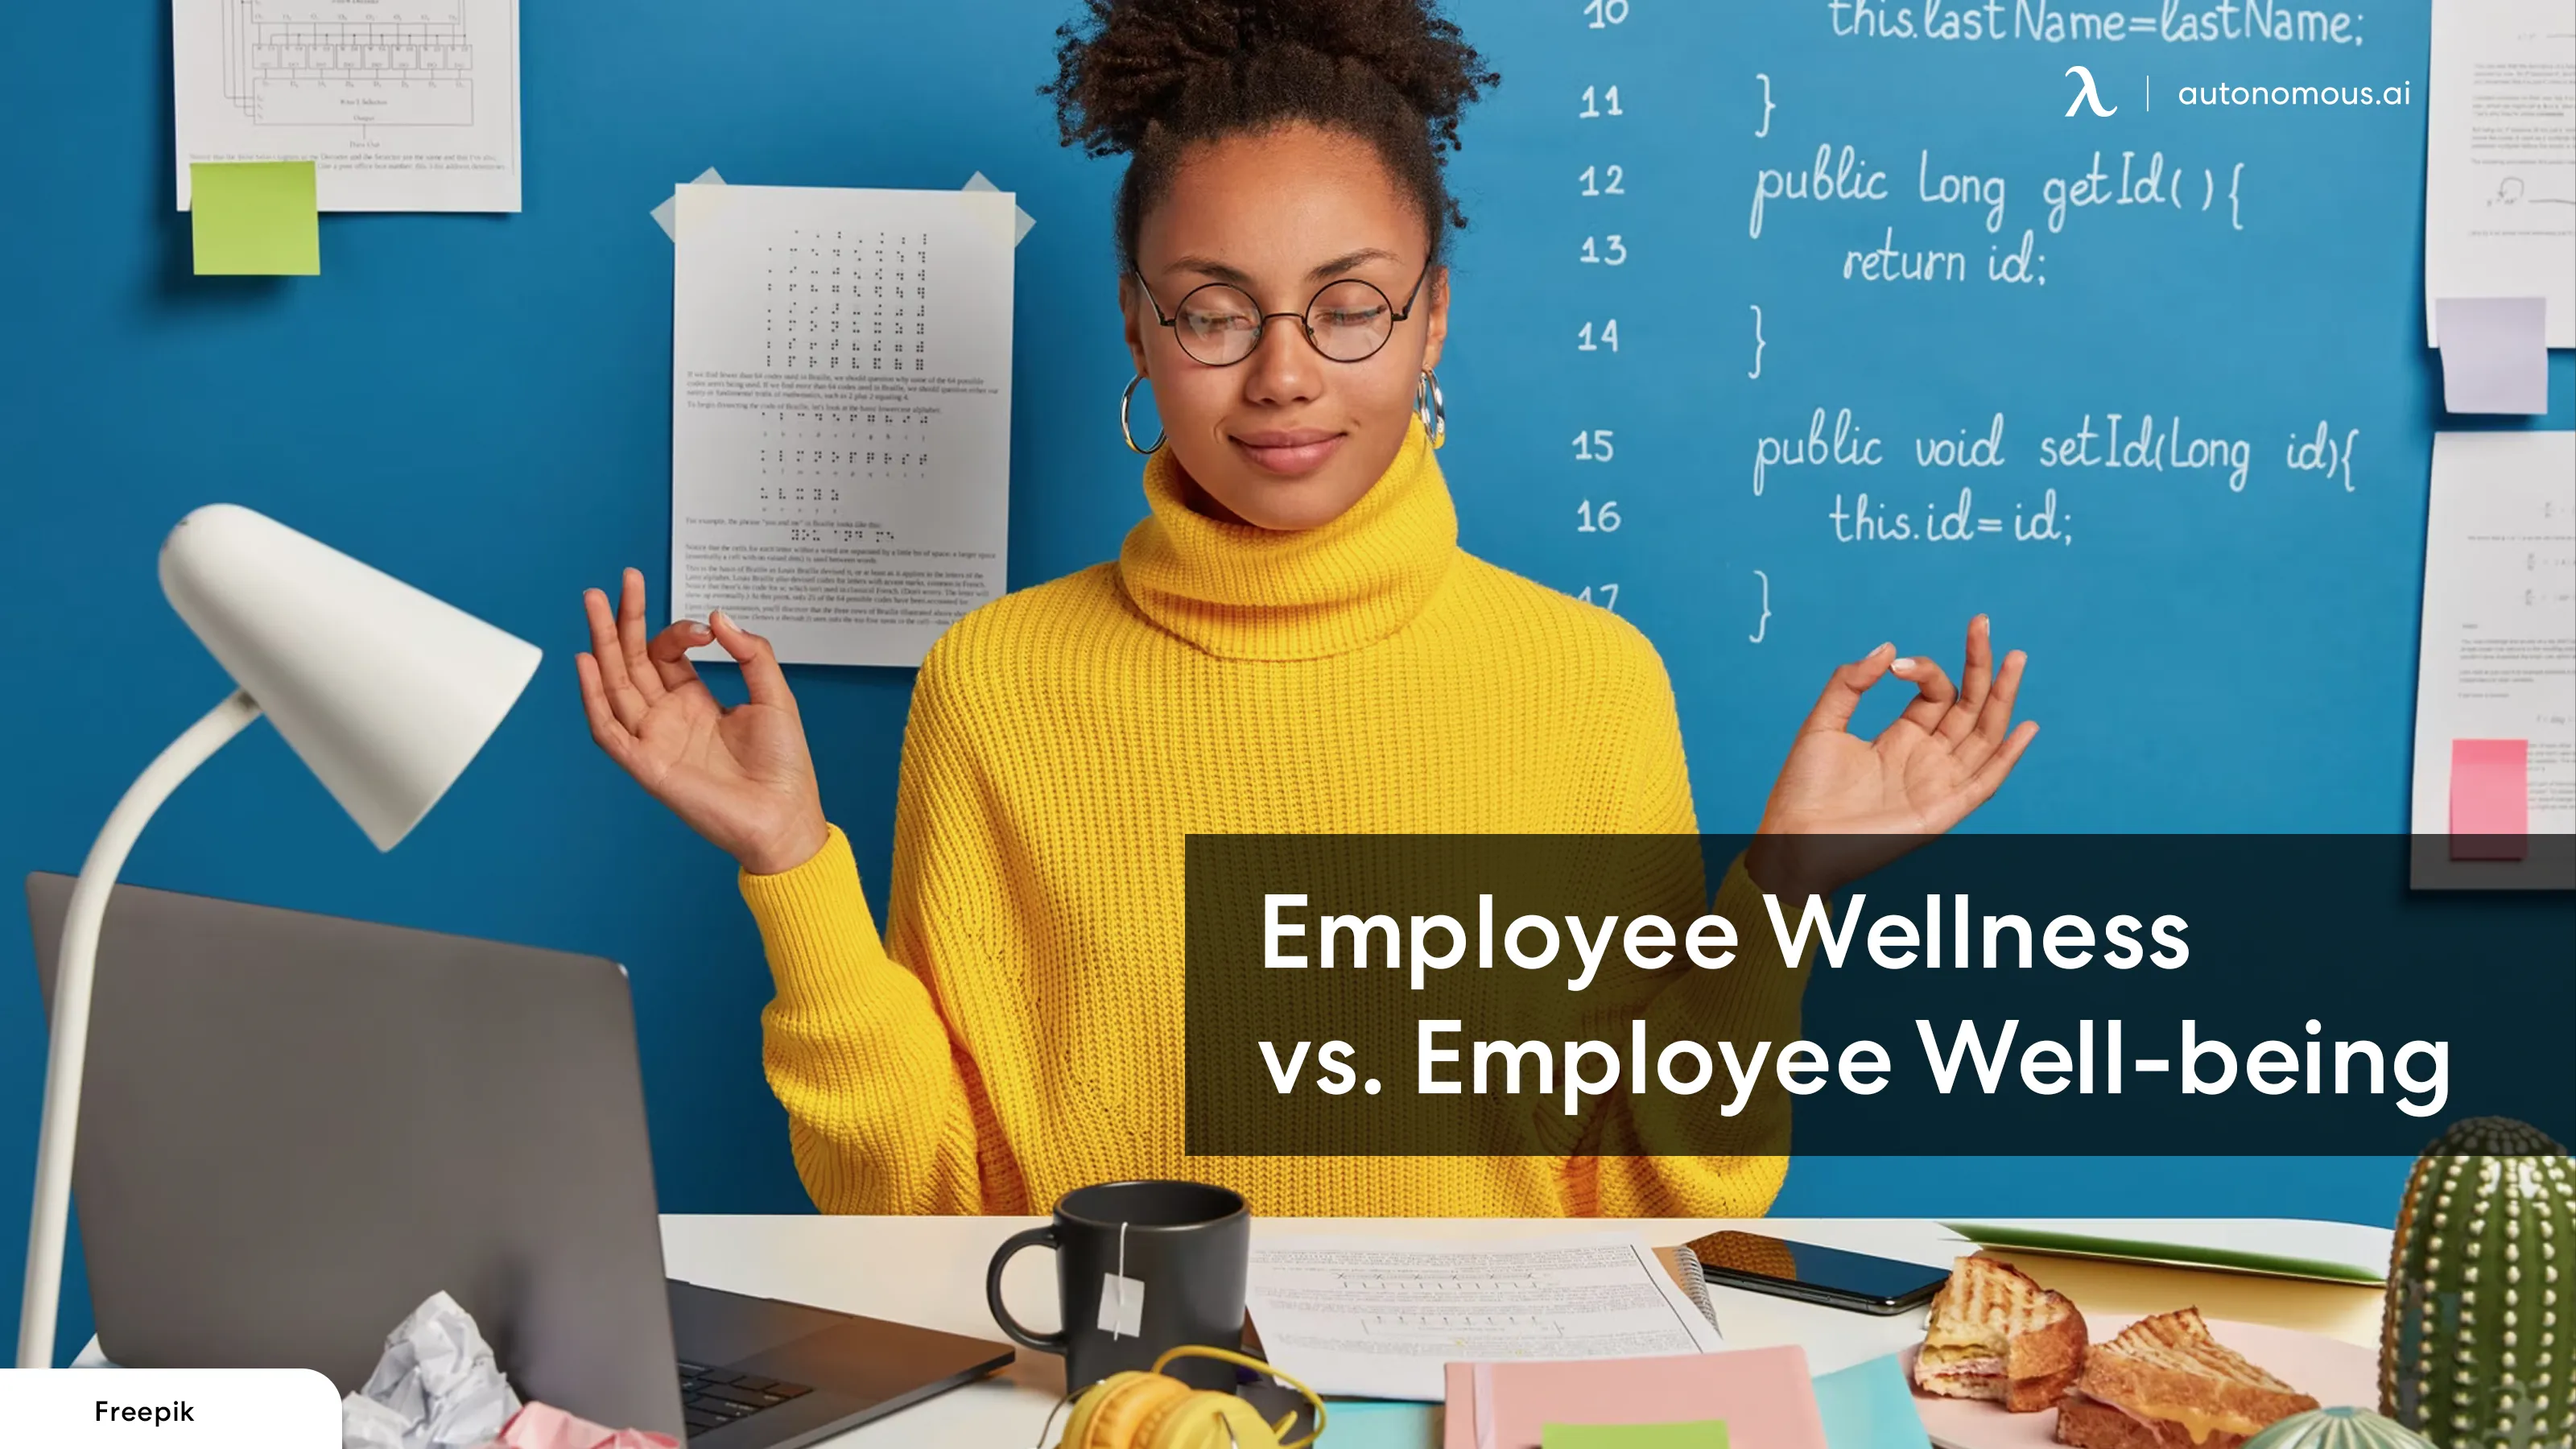 Differences Between Employee Wellness and Employee Well-being